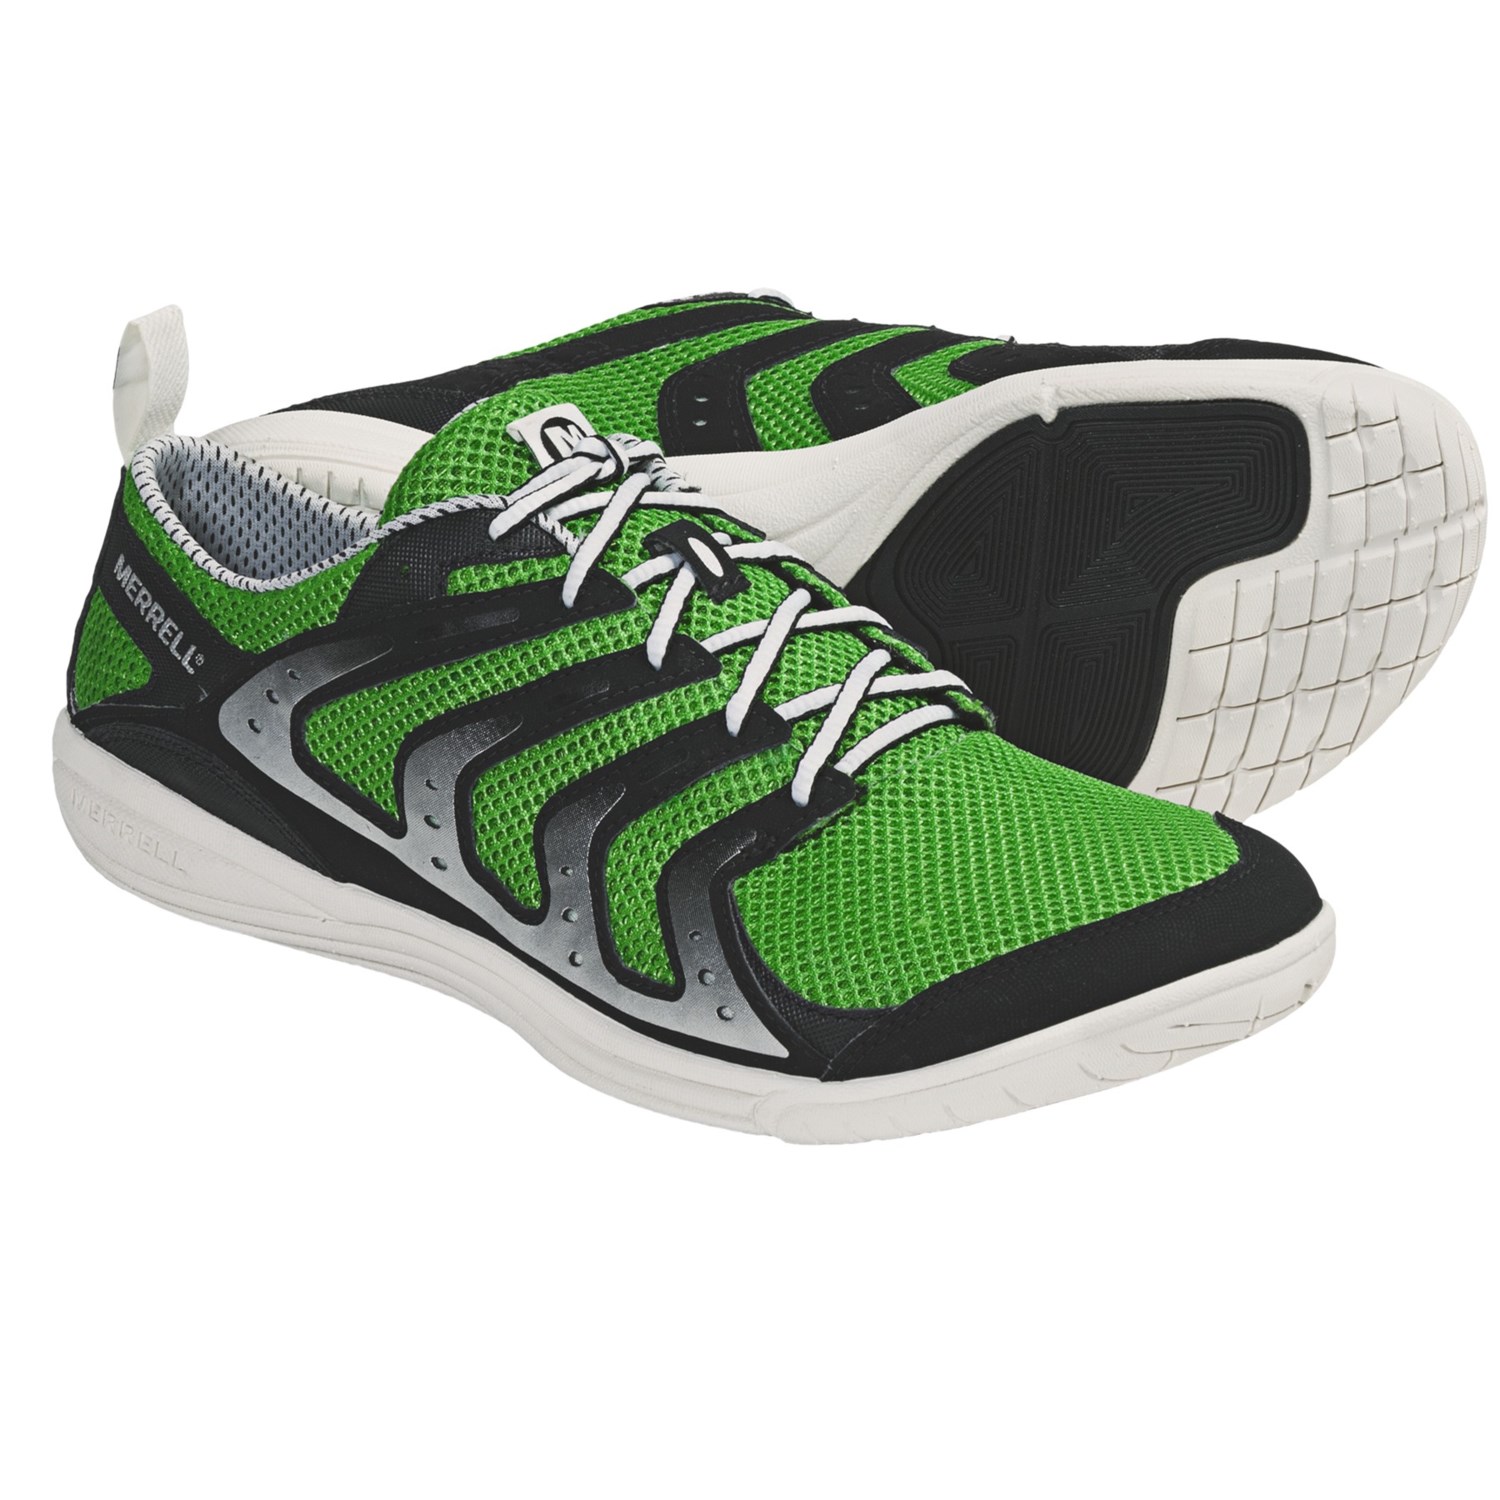 Shoes Stores Near Me: What Are Barefoot Running Shoes